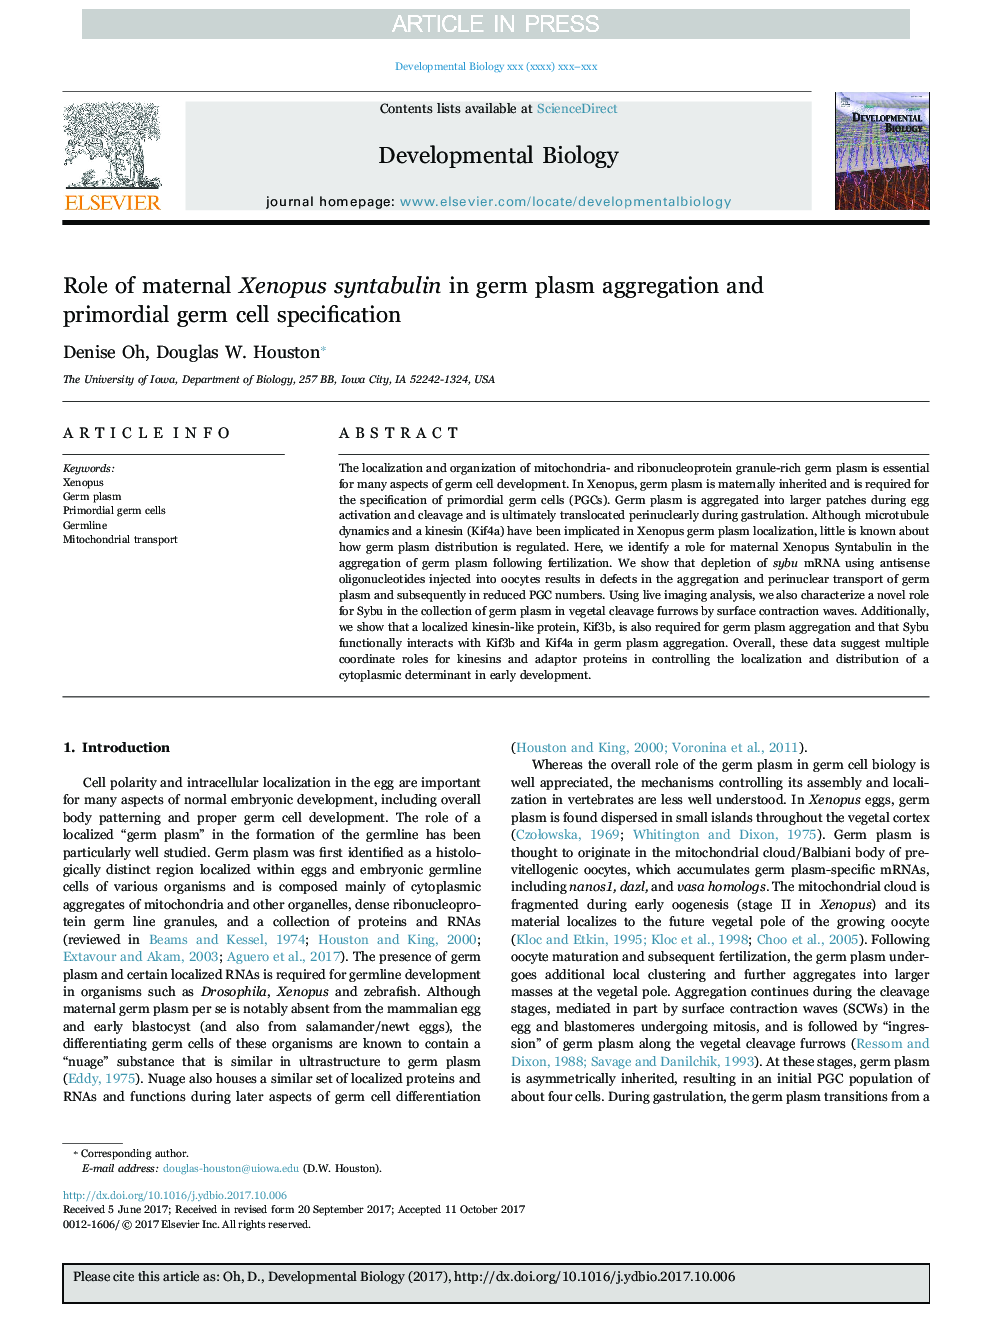 Role of maternal Xenopus syntabulin in germ plasm aggregation and primordial germ cell specification